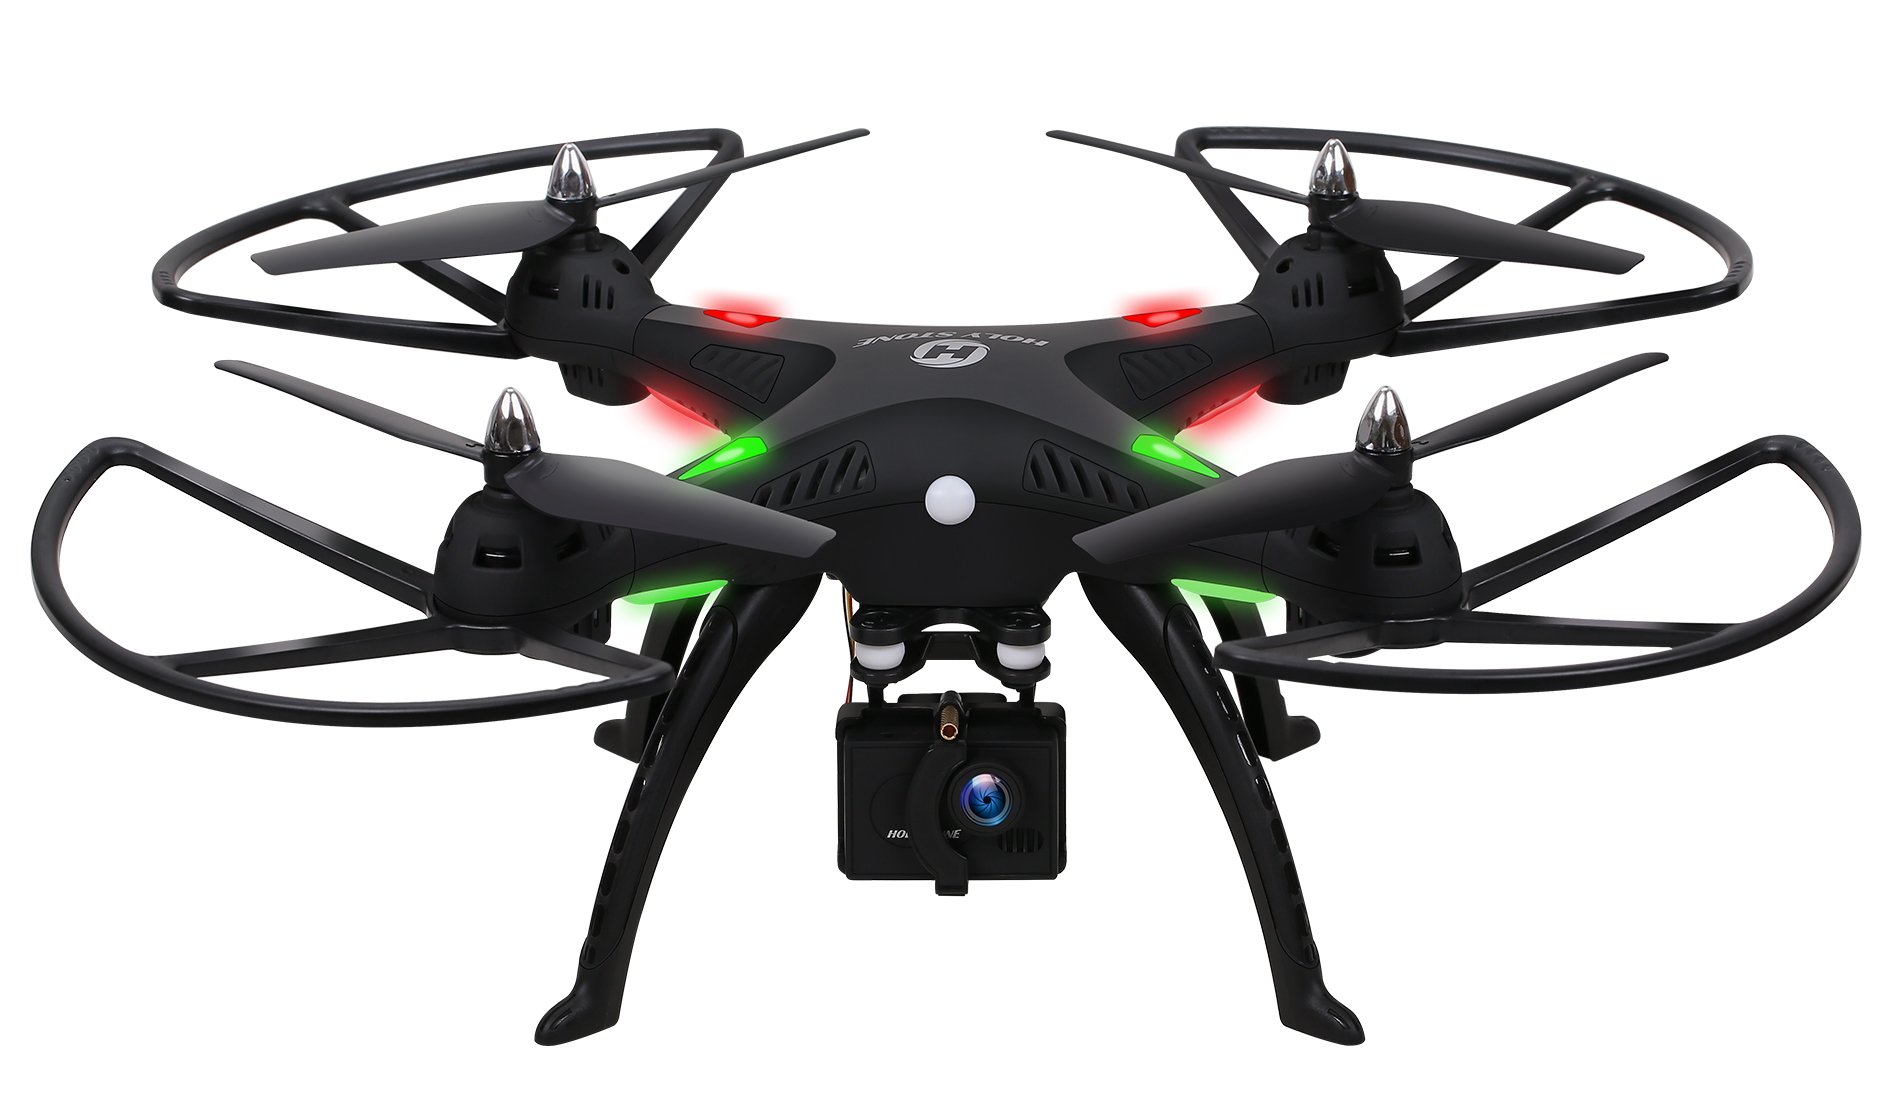 Thiết bị bay không người lái 1080P Camera Drone,Holy Stone HS300 RC Quadcopter with 120° Wide-angle HD Camera 6-Axis gyro 2.4 GHz